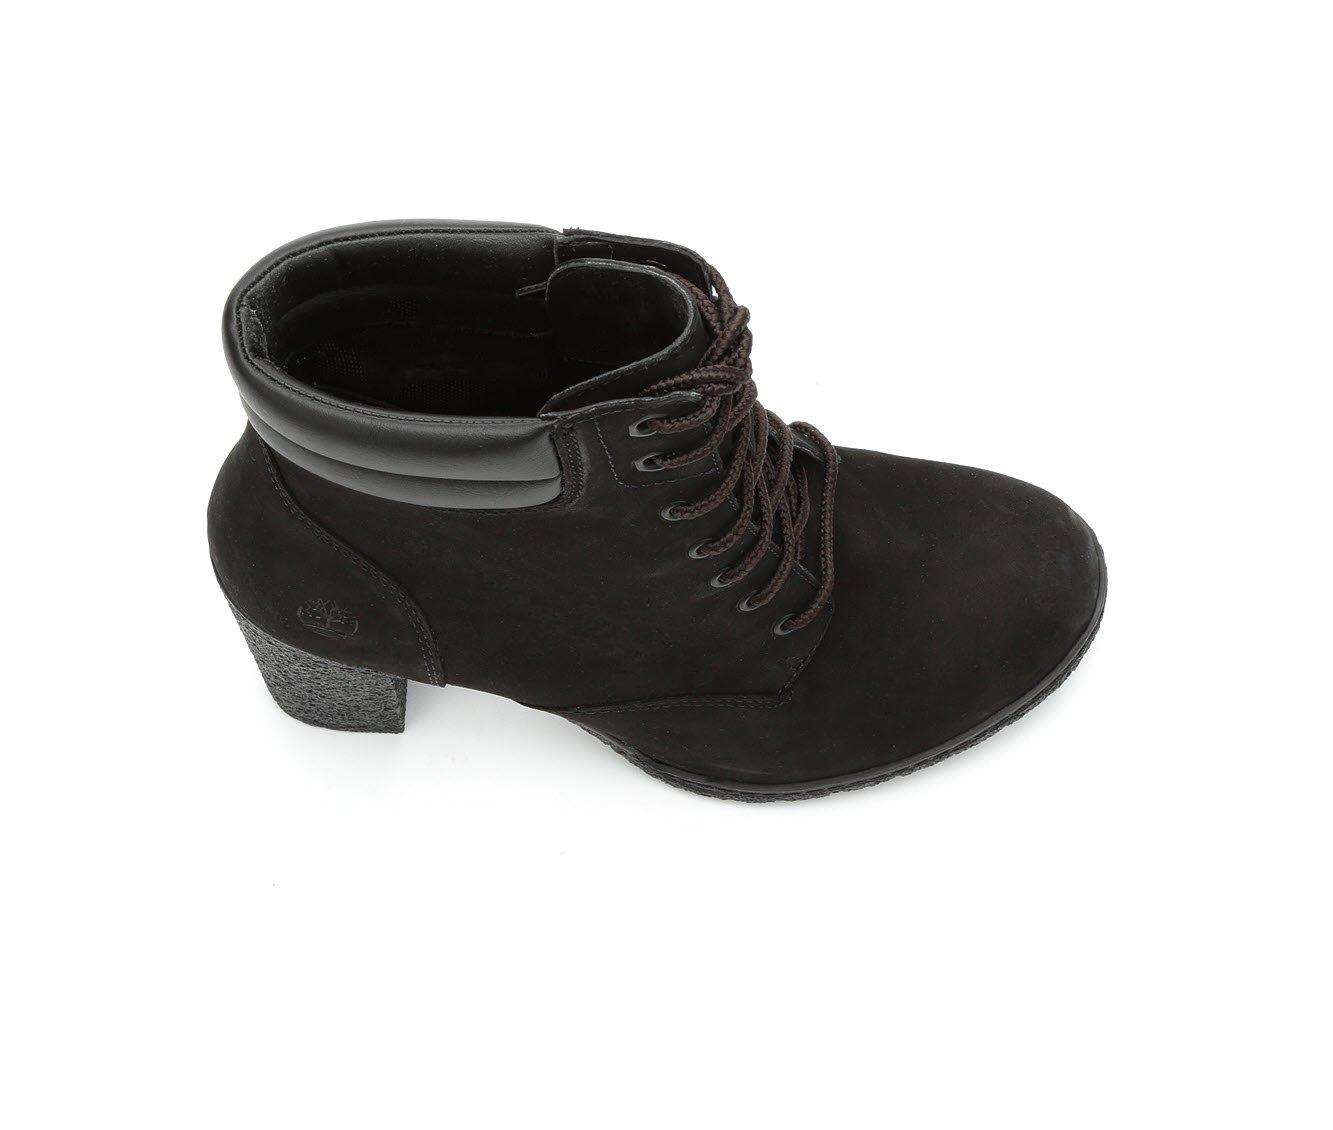 Women's Timberland Lace-Up Boots | Shoe